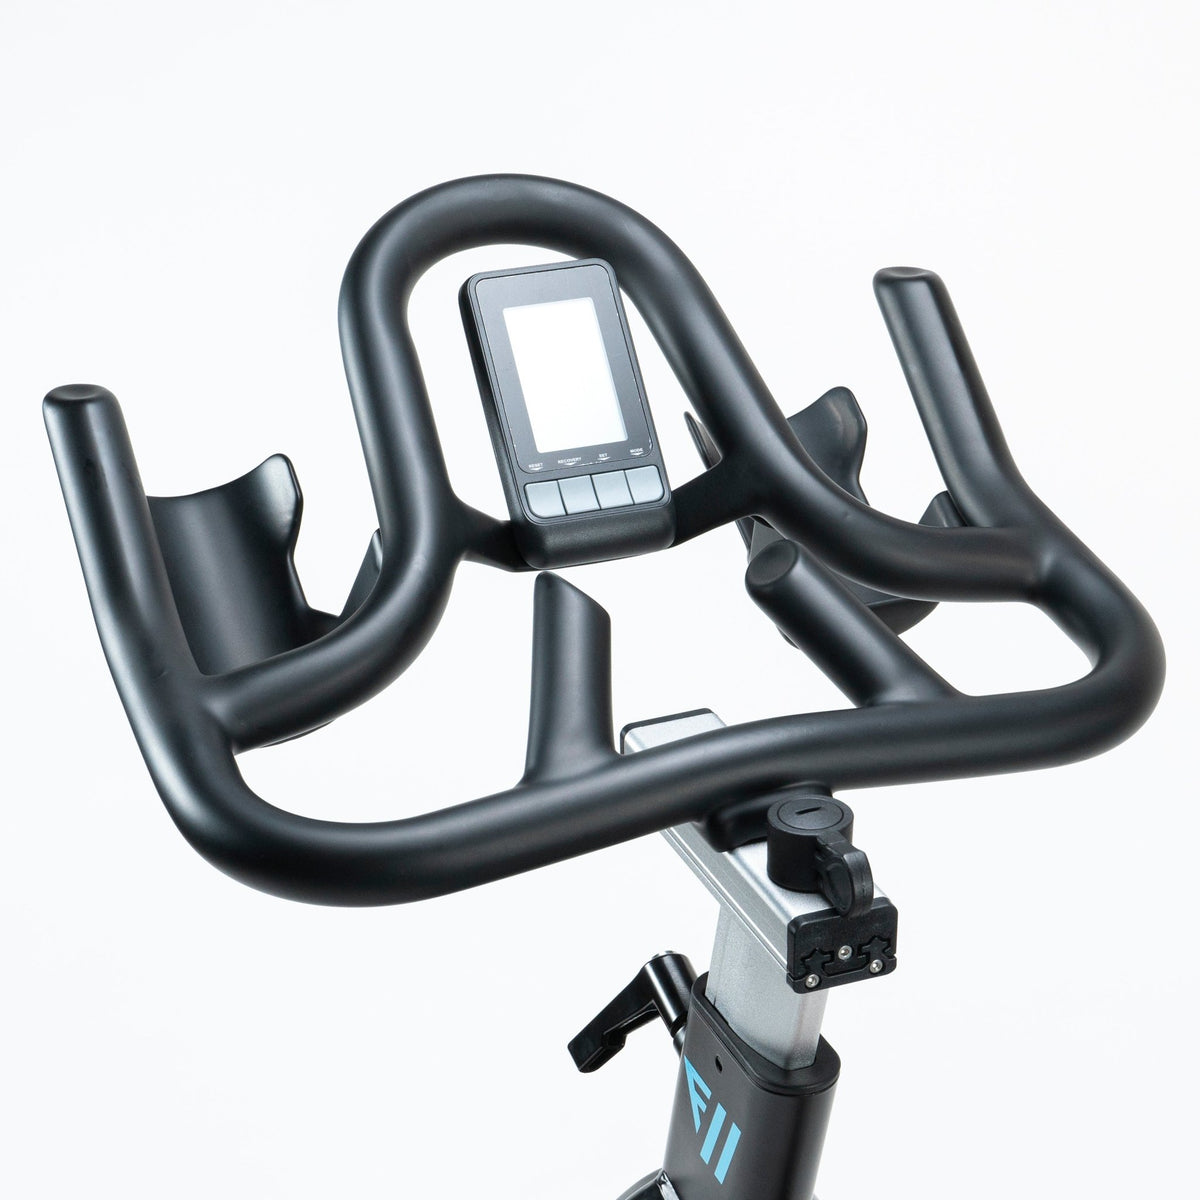 FitWay Equip. 1500IC Indoor Cycle - Handle Bars with Console